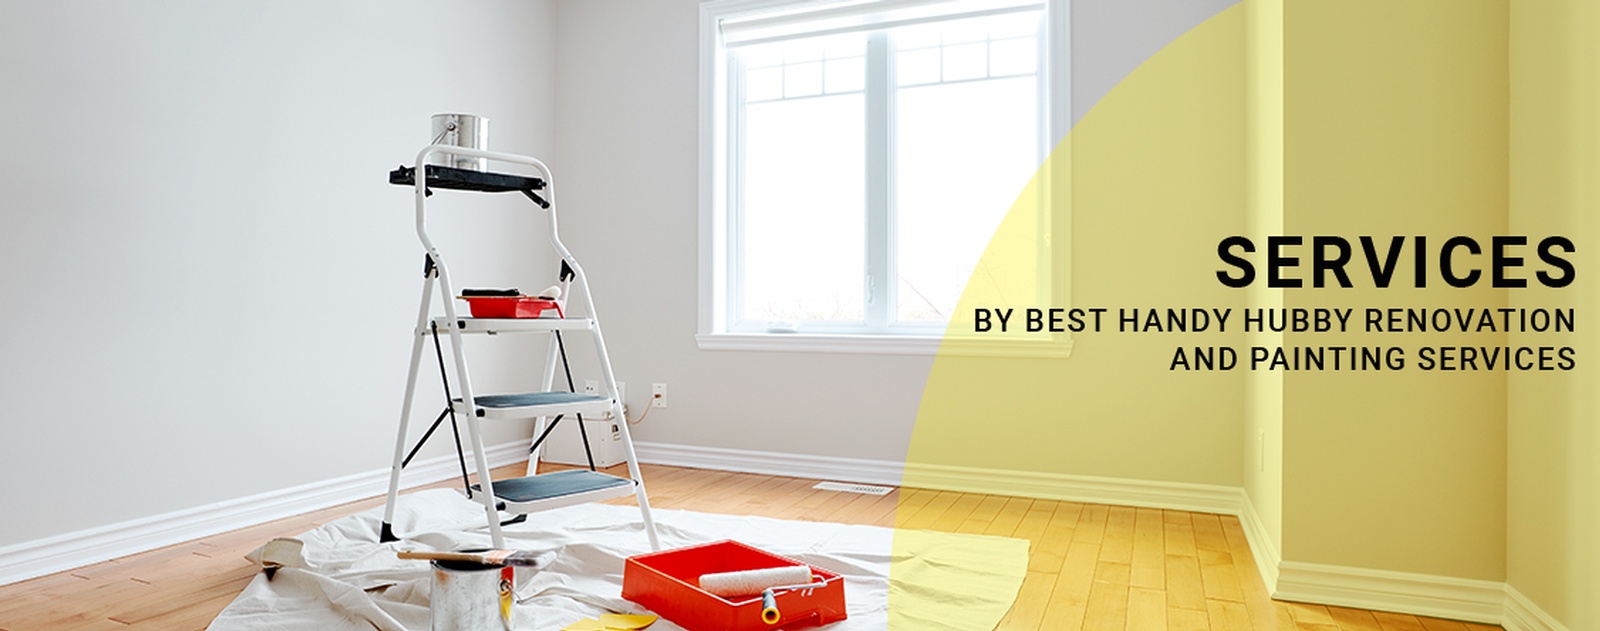 Painting and Renovation Services Vancouver Best Handy Hubby Renovation and Painting Services